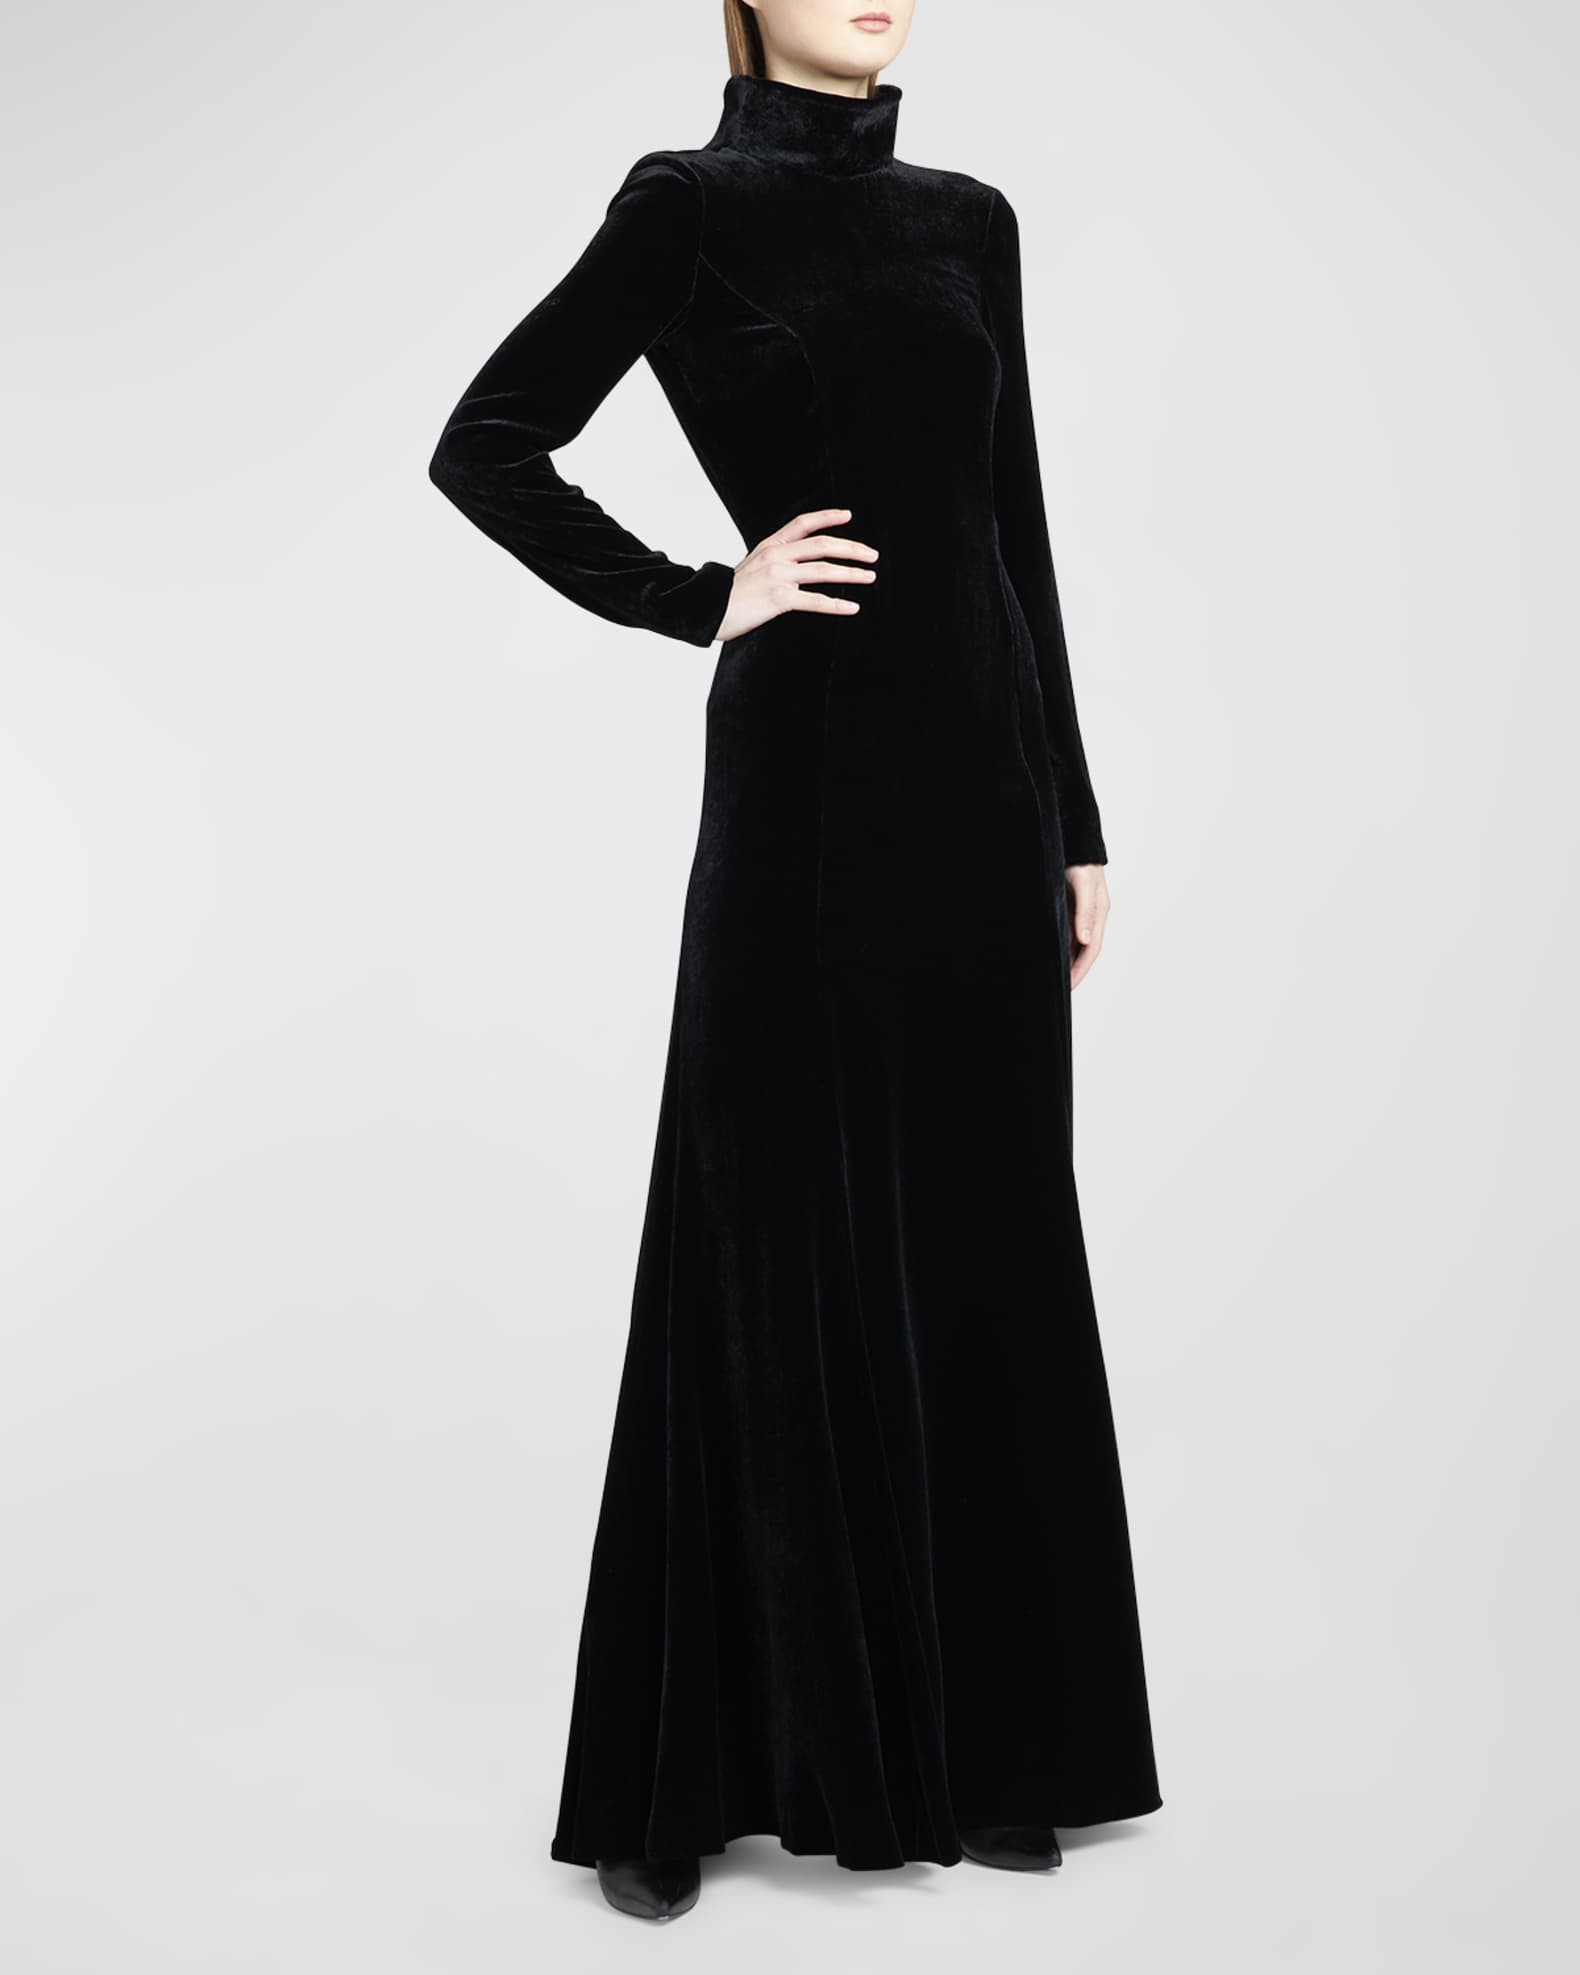 Long evening dress with embroidered on lace and velvet back Chanel